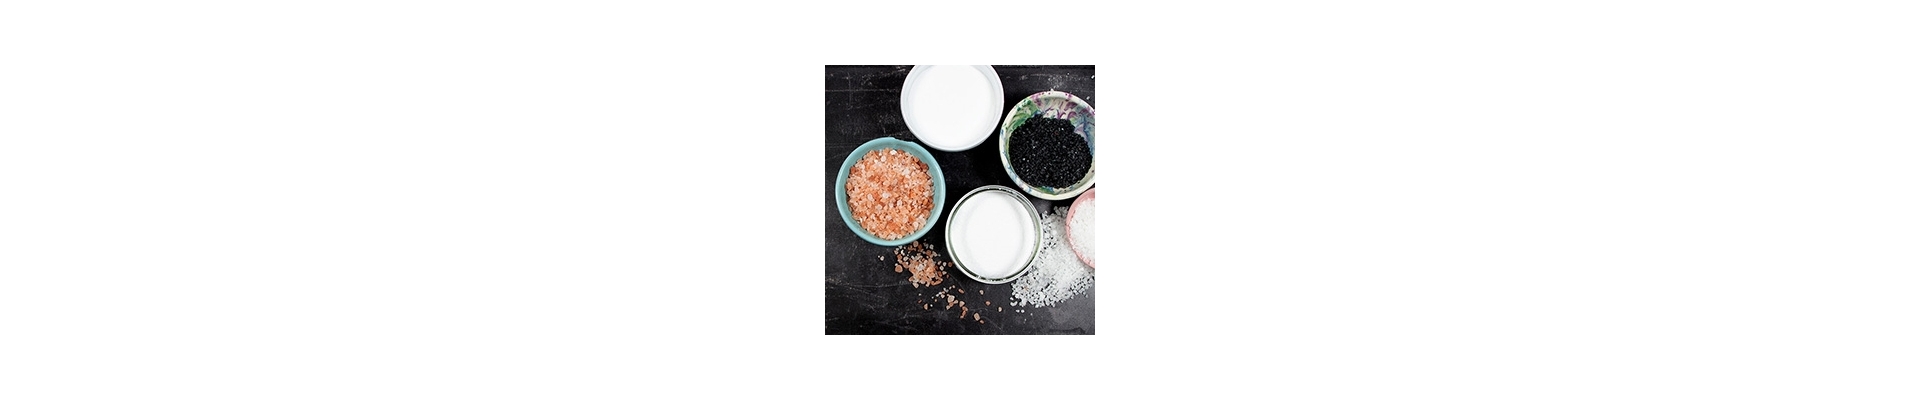 Additives & Chemicals for Cosmetics | The Soap Kitchen™